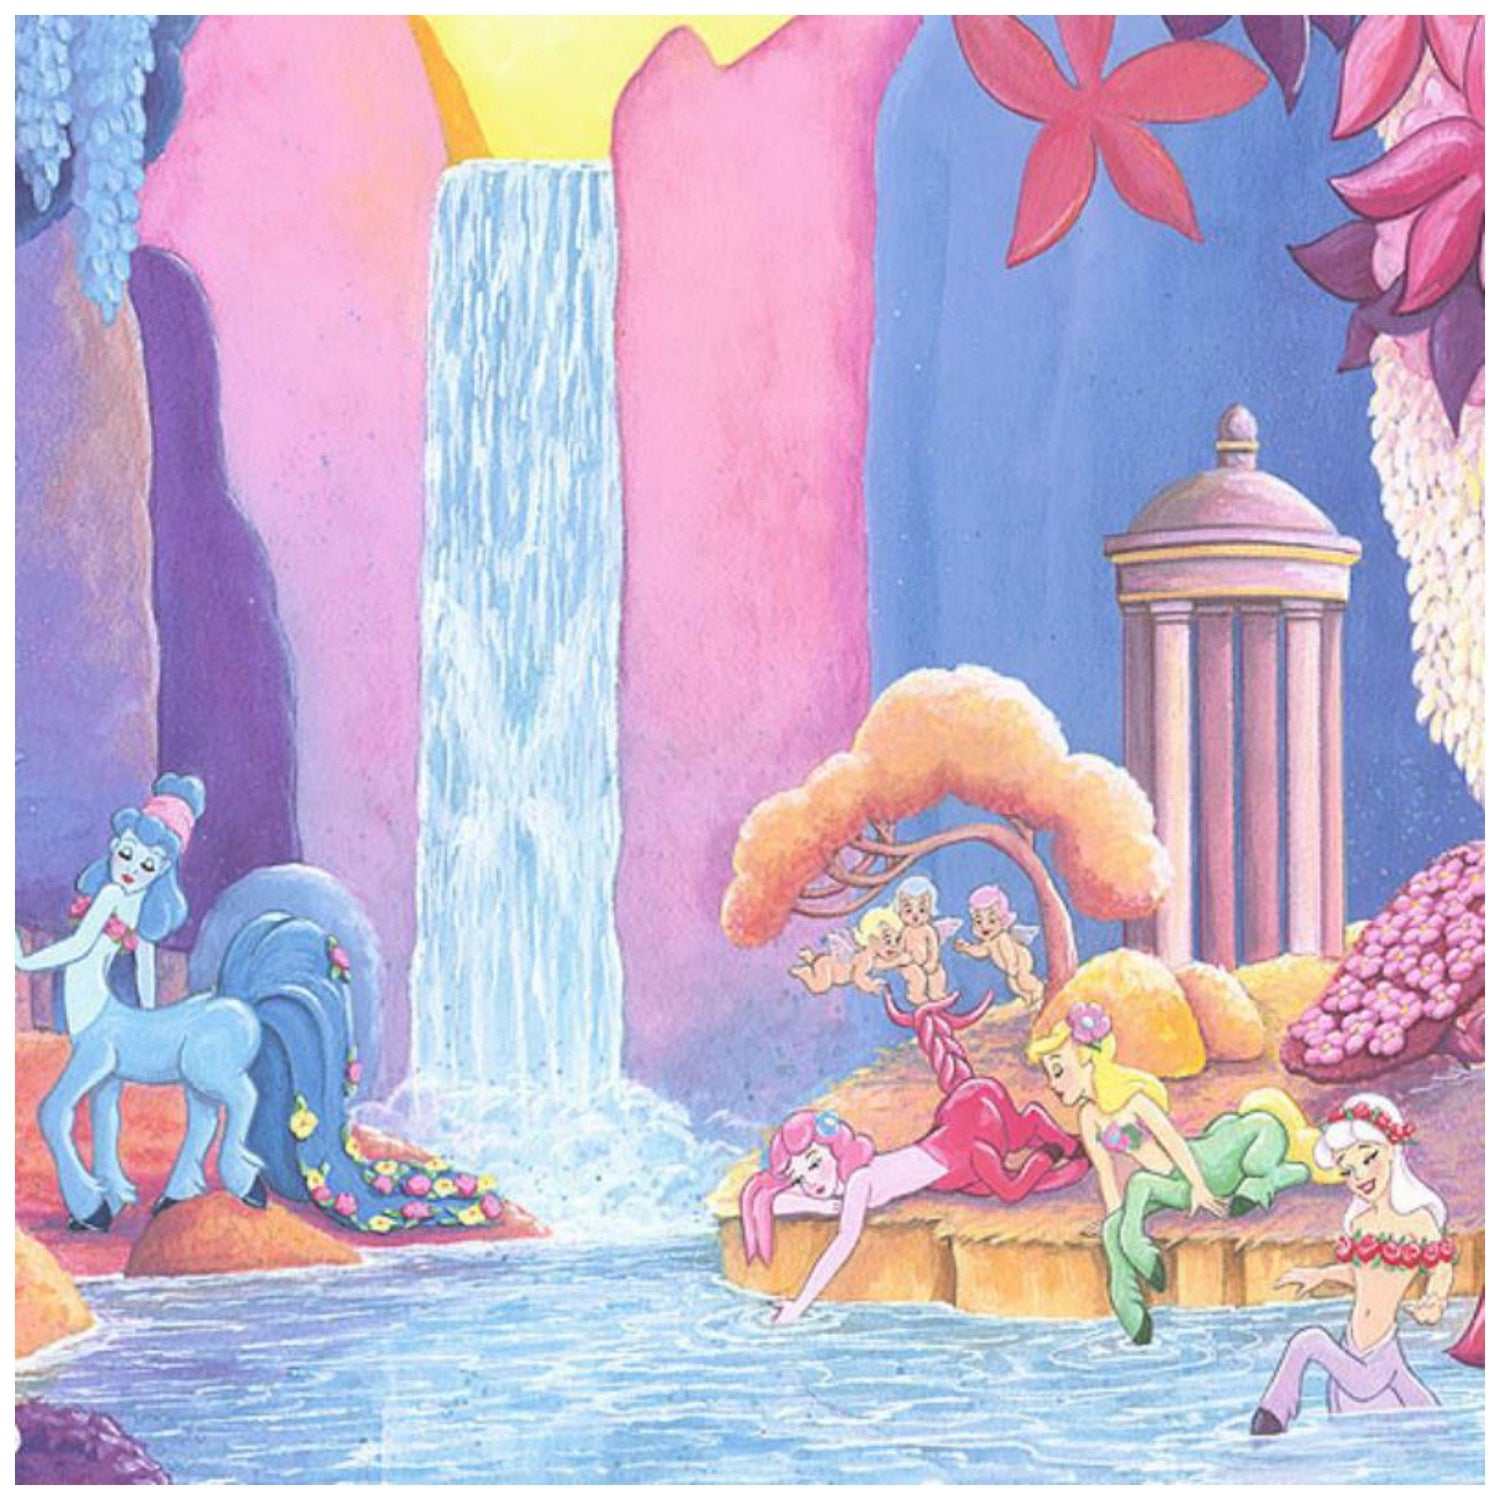 Garden of Beauty by Michelle St. Laurent.  The beautiful mystical colorful water garden of unusual creatures, from the unforgettable scene in Fantasia&